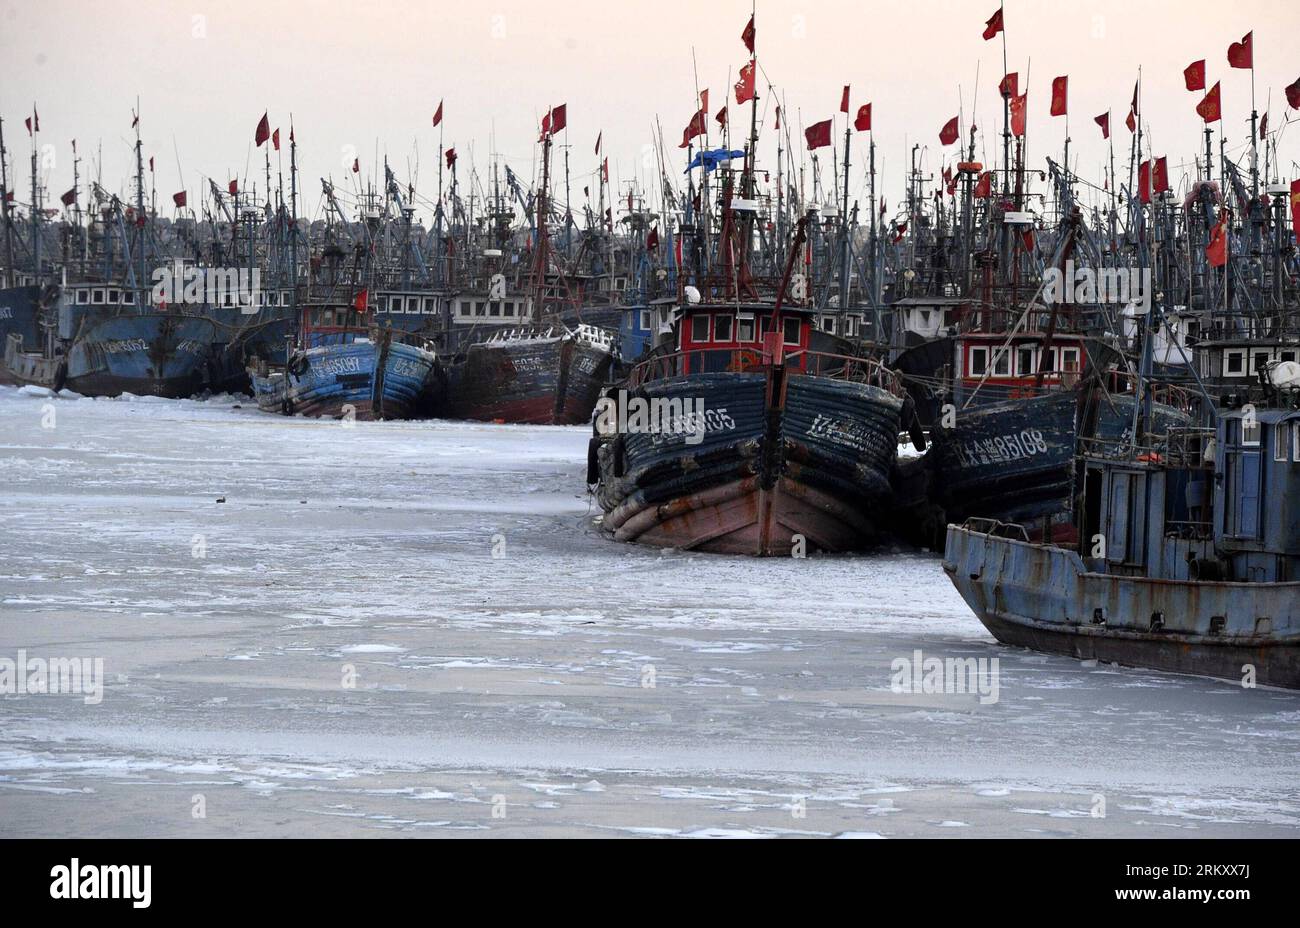 Bildnummer: 59100182  Datum: 17.01.2013  Copyright: imago/Xinhua Hundreds of fishing boats are seen at a harbor in Jinzhou New District, Dalian City, northeast China s Liaoning Province, Jan. 17, 2013. The floating ice covers 5,429 square kilometers of Bohai Sea and 5,808 square kilometers of northern Yellow Sea, the National Marine Forecasting Station reported on Thursday. (Xinhua/Liu Debin) (gqd) CHINA-BOHAI SEA-YELLOW SEA-FLOATING ICE (CN) PUBLICATIONxNOTxINxCHN Wirtschaft Fischfang Winter Eis eingefroren x0x xds 2013 quer Aufmacher premiumd     59100182 Date 17 01 2013 Copyright Imago XINH Stock Photo